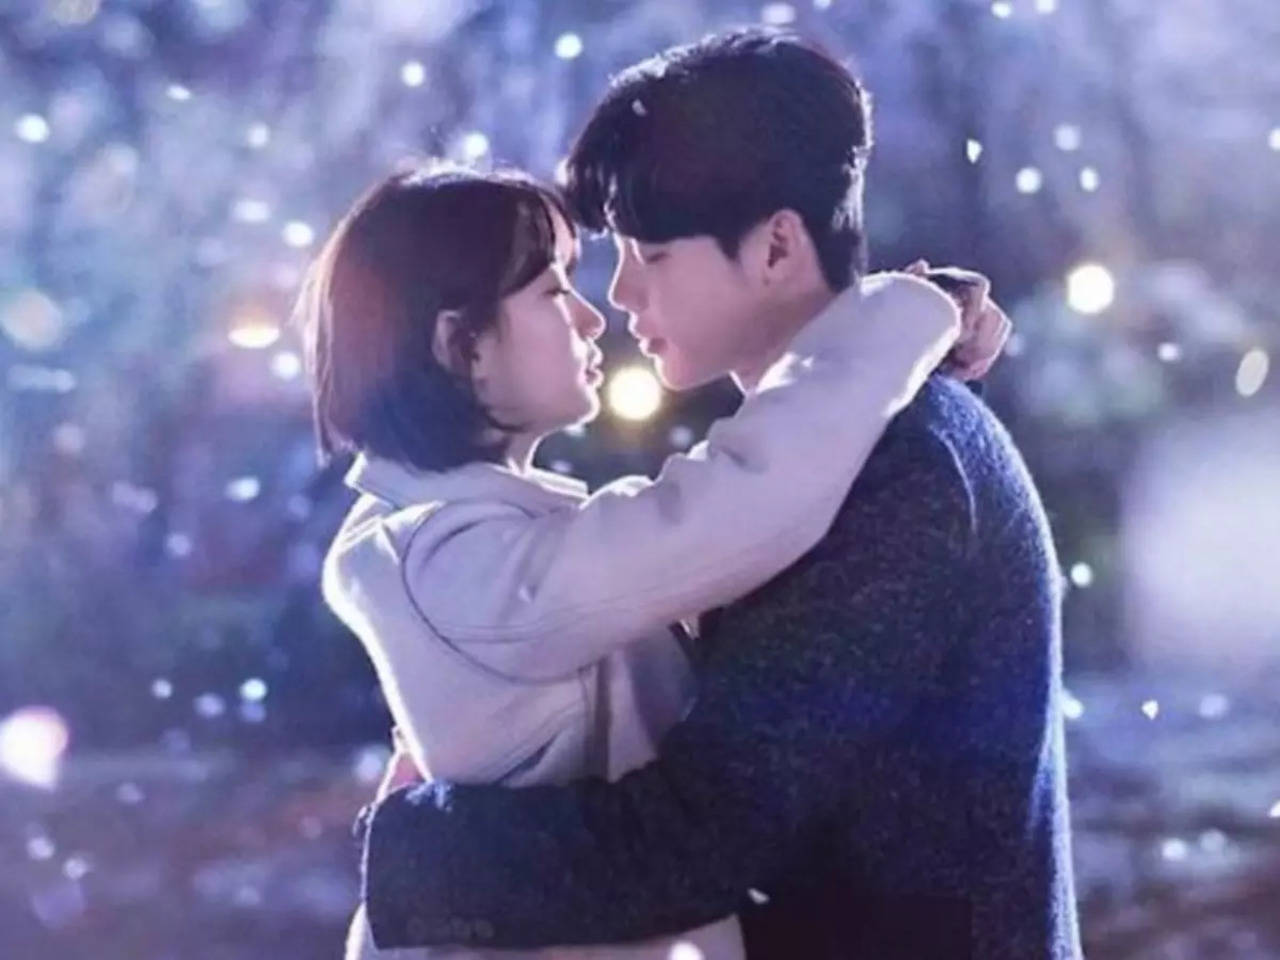 How Korean dramas have affected our LOVE lives pic